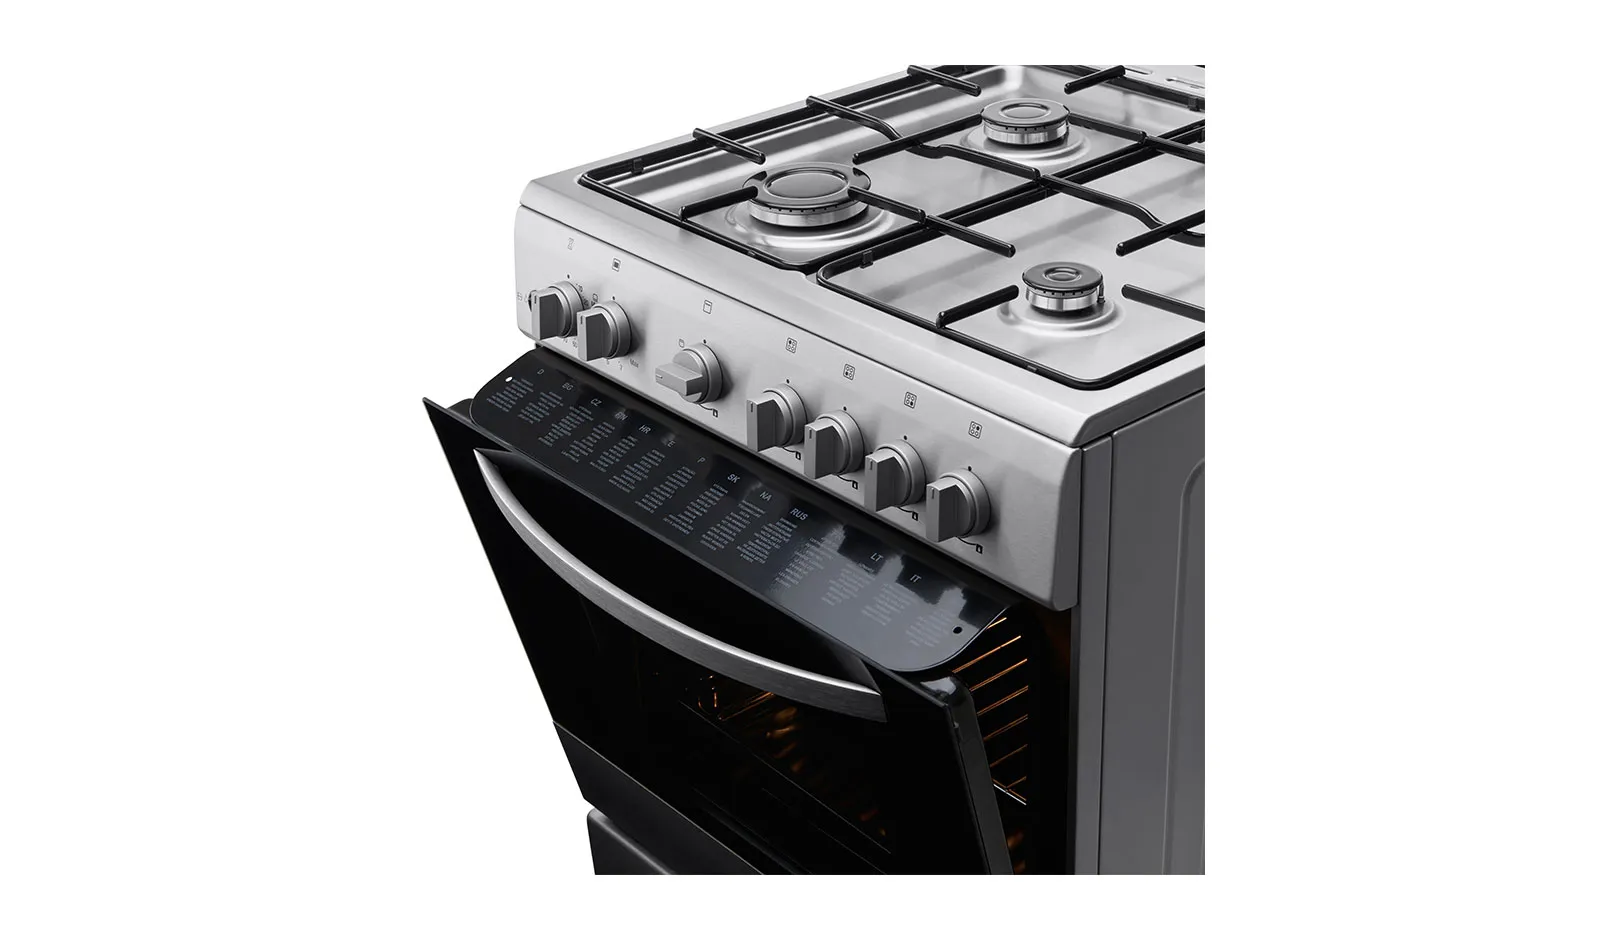 LF68V00S CUISINIERE LG 4 Feux GRIS LF68V00S - 1